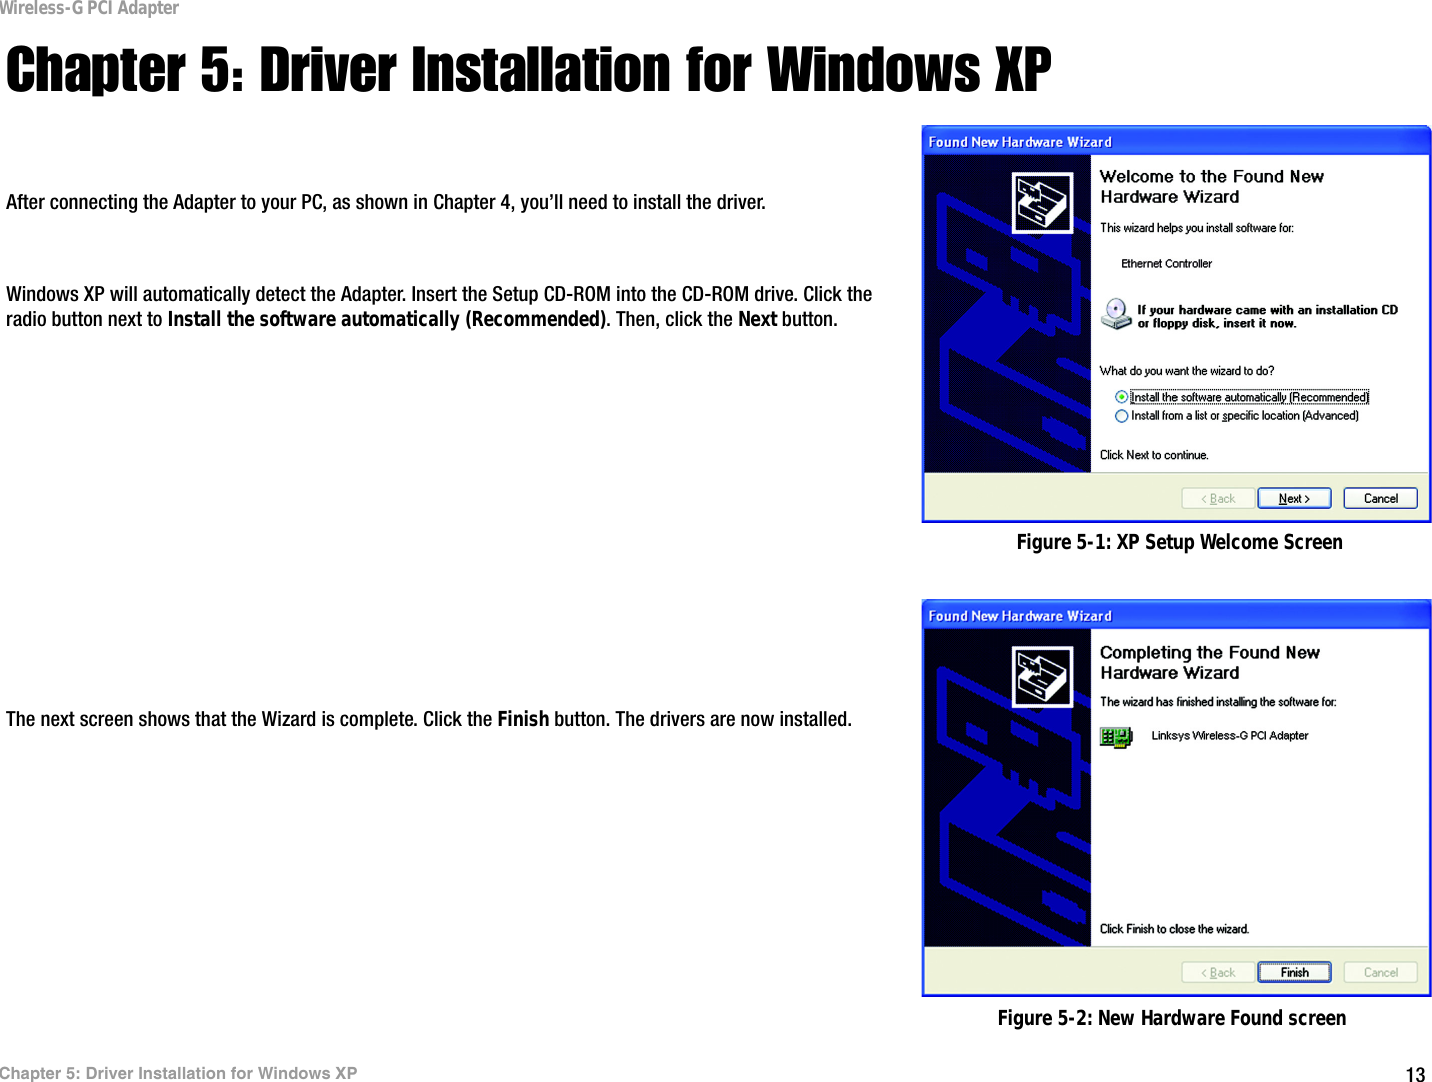 13Chapter 5: Driver Installation for Windows XPWireless-G PCI AdapterChapter 5: Driver Installation for Windows XPAfter connecting the Adapter to your PC, as shown in Chapter 4, you’ll need to install the driver.Windows XP will automatically detect the Adapter. Insert the Setup CD-ROM into the CD-ROM drive. Click the radio button next to Install the software automatically (Recommended). Then, click the Next button.The next screen shows that the Wizard is complete. Click the Finish button. The drivers are now installed. Figure 5-1: XP Setup Welcome ScreenFigure 5-2: New Hardware Found screen